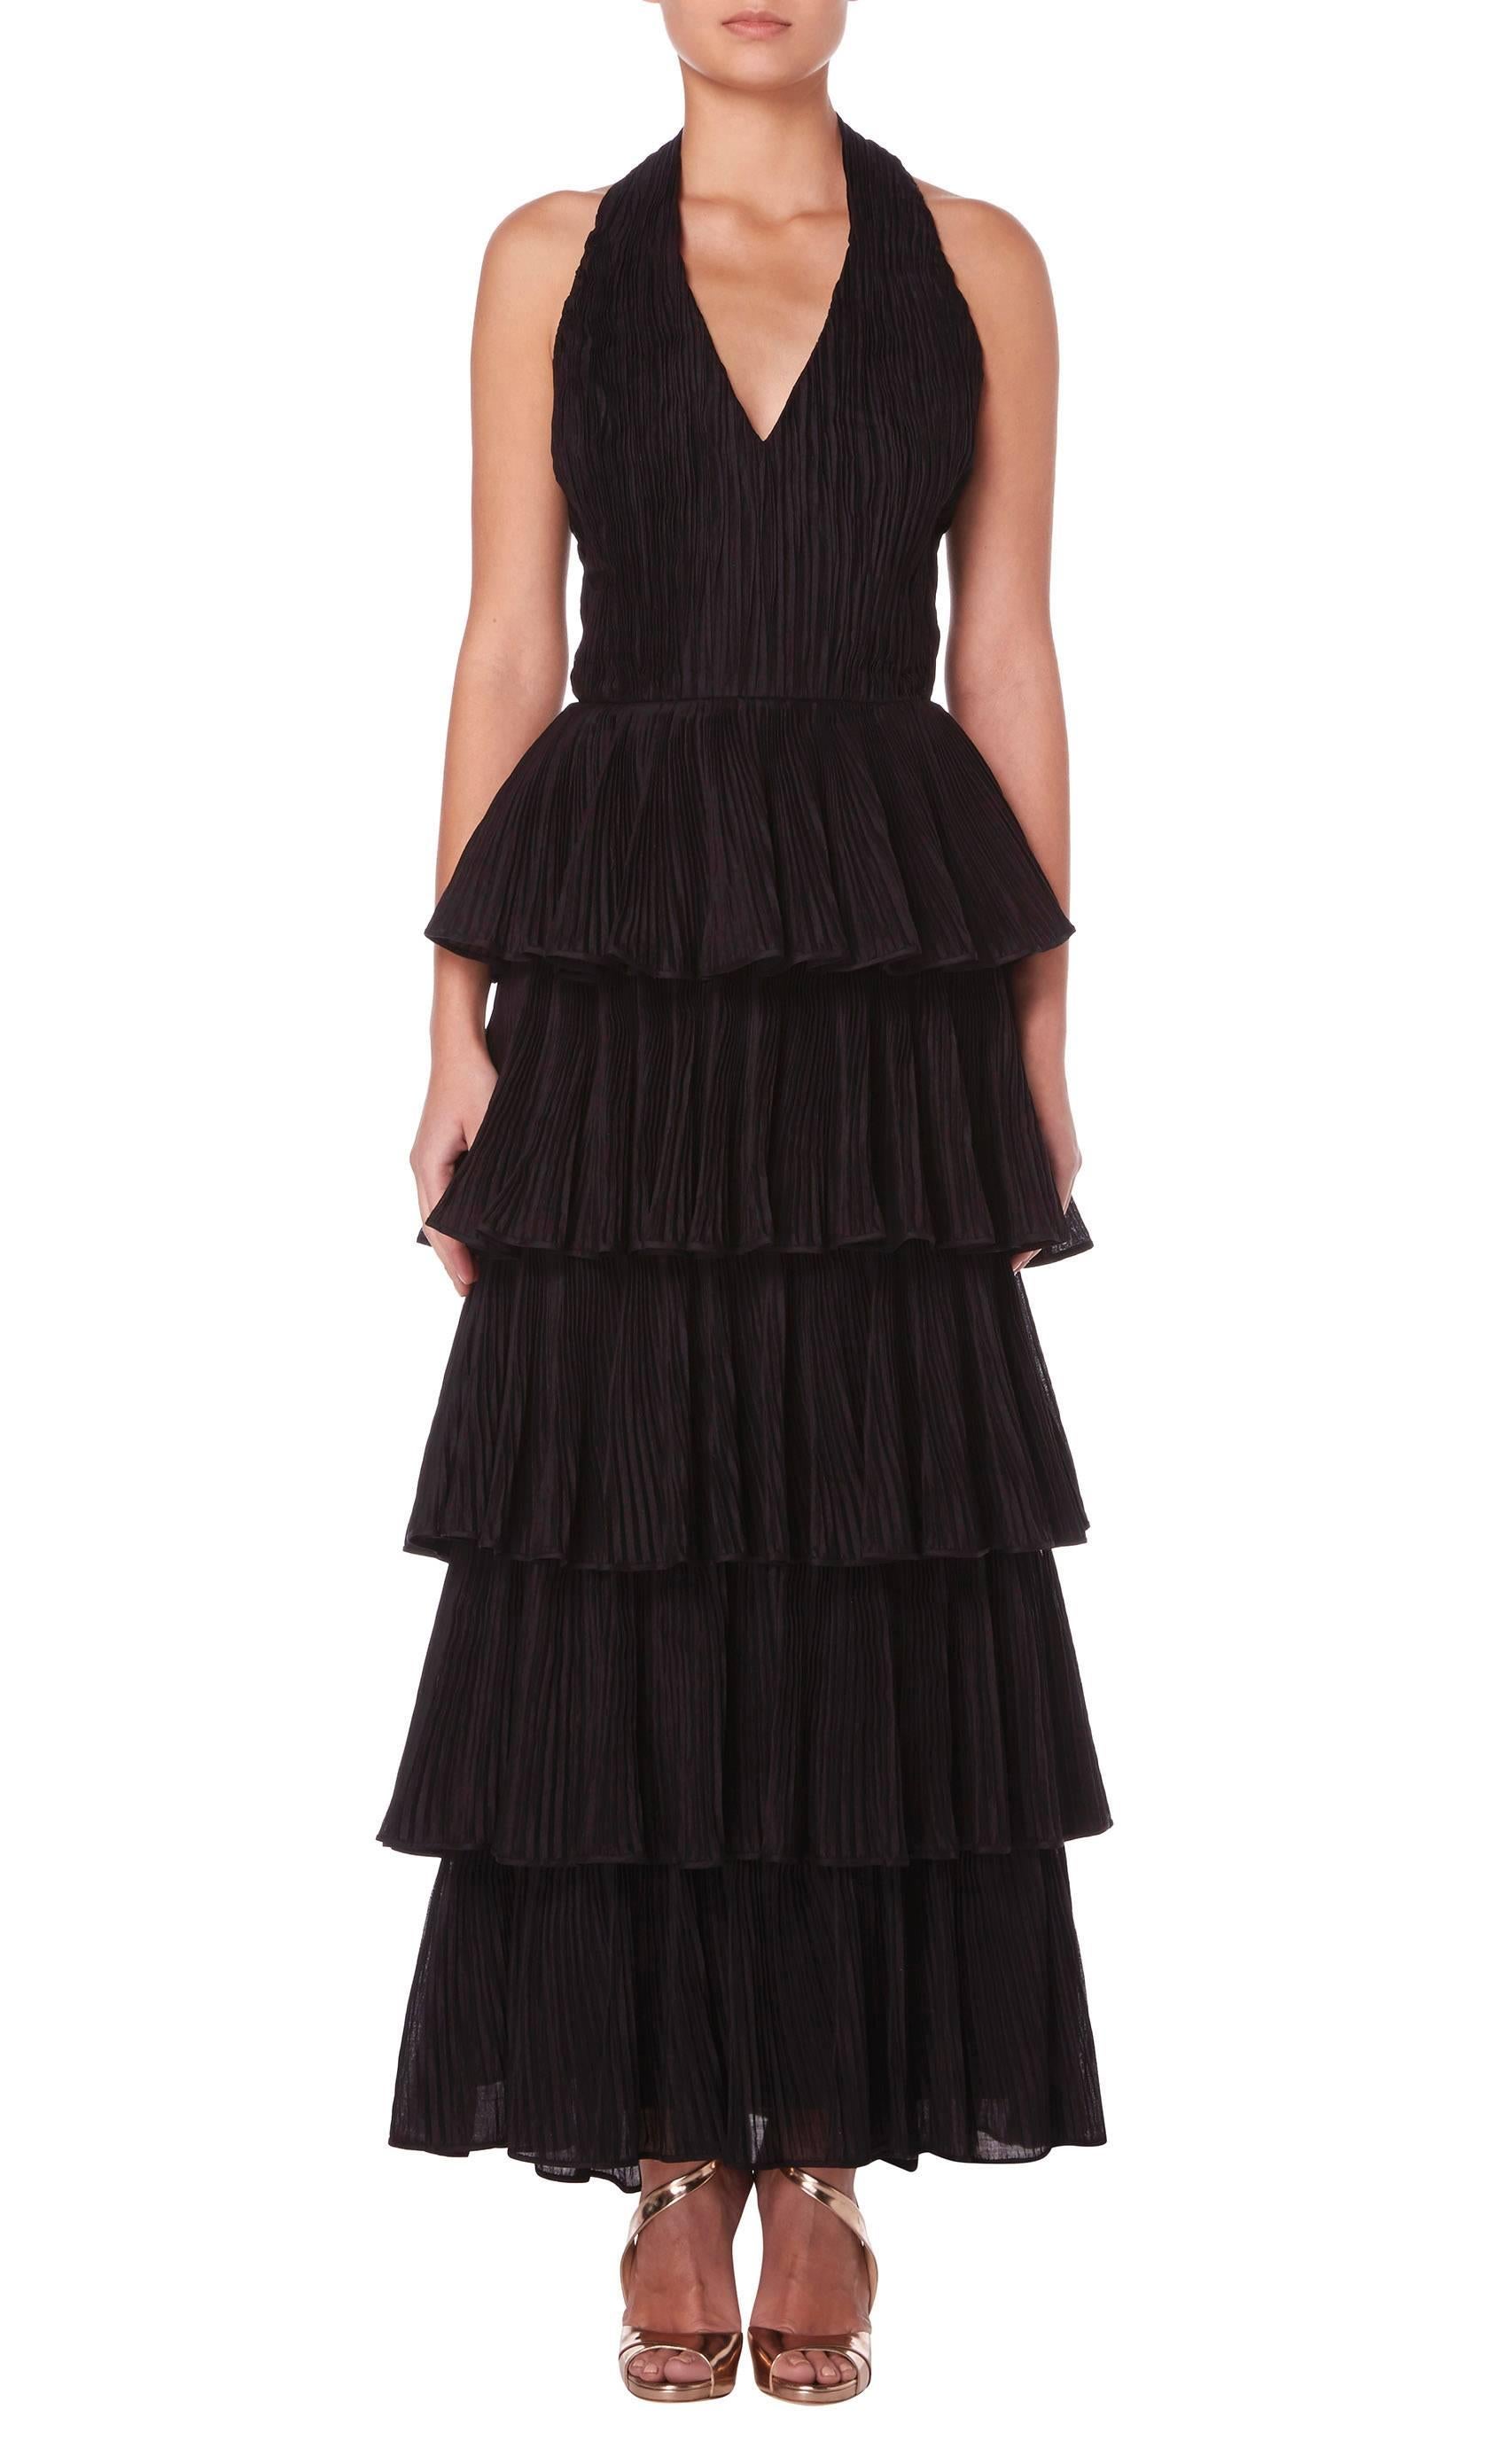 
A fantastic example of Sybil Connolly's signature style, this stunning halterneck gown would make the perfect choice for a red carpet event. Constructed in micro-pleated black linen, the gown features a flattering v-neckline and has an exposed